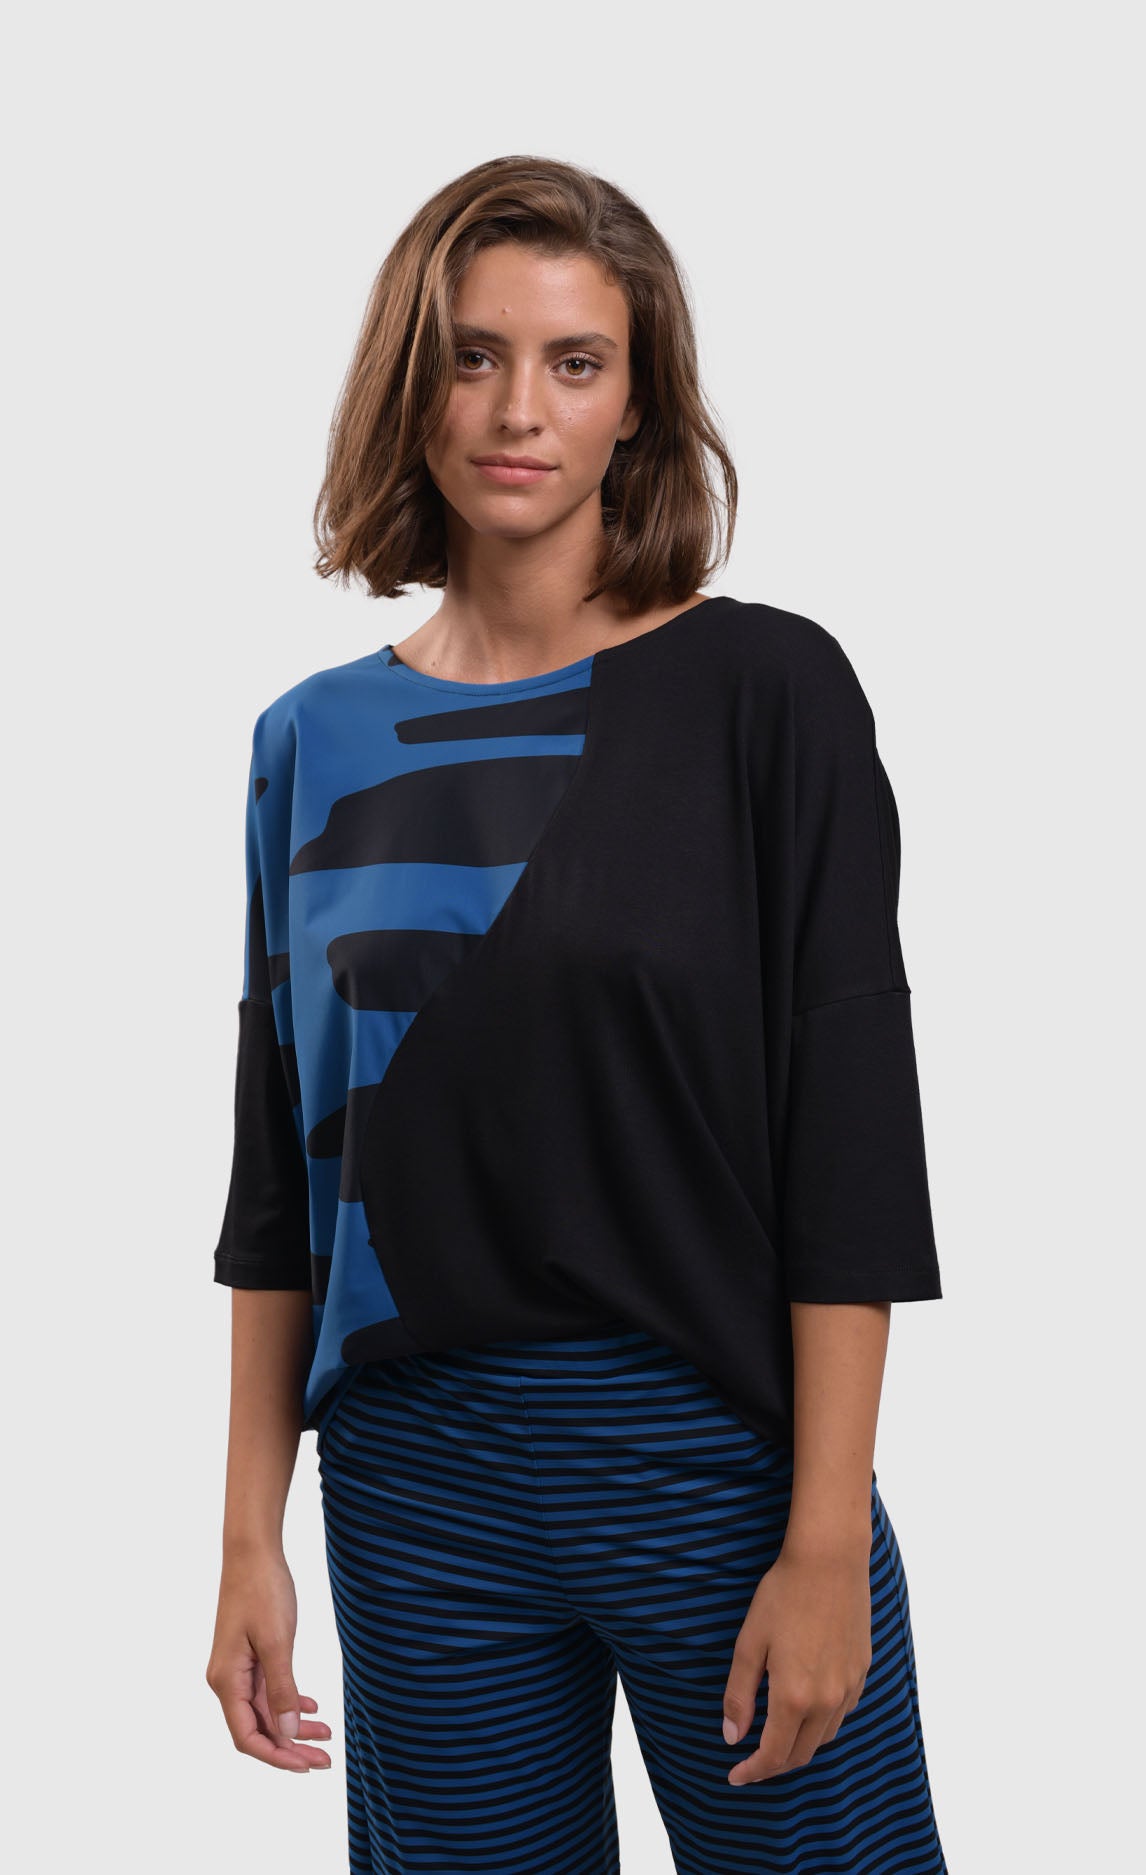 Front top half view of a woman wearing blue and black striped pants and the alembika tekbika ocean wave top. This top is black with a right sides wave paneling design in blue. The top as a scoop neck and drop shoulder, 3/4 length sleeves.